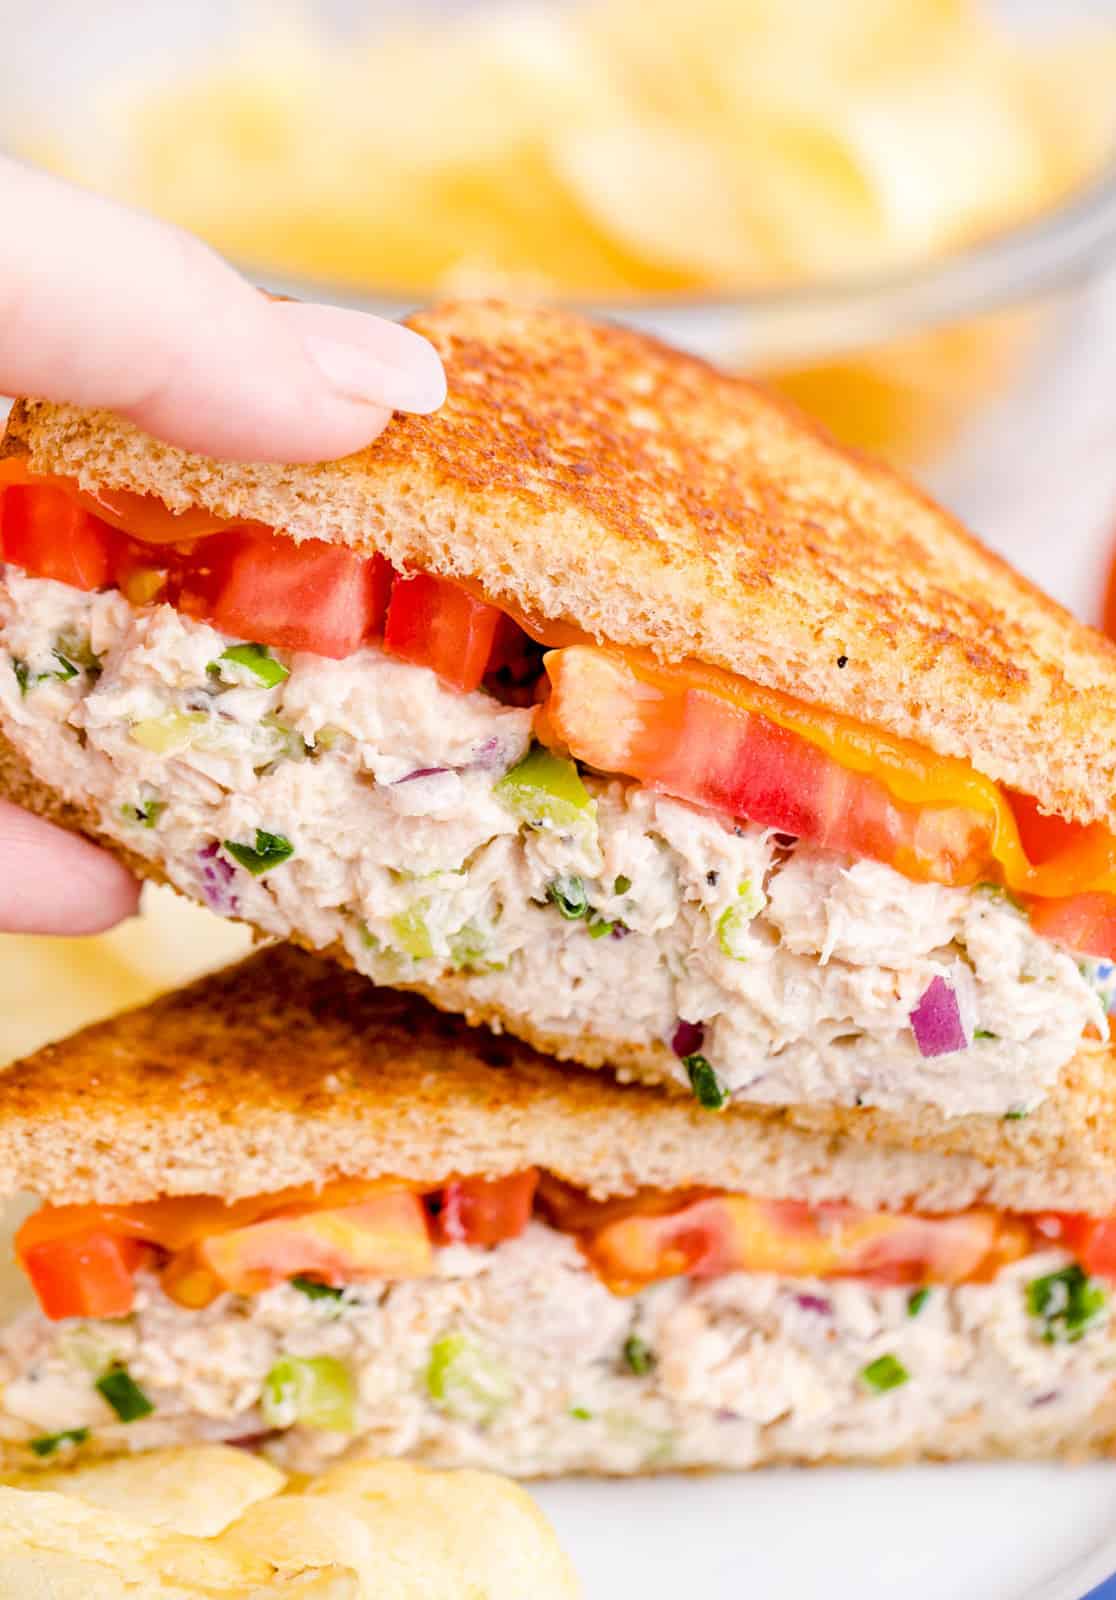 Hand placing one side of the Tuna Melt Recipe on top of other slice of sandwich.